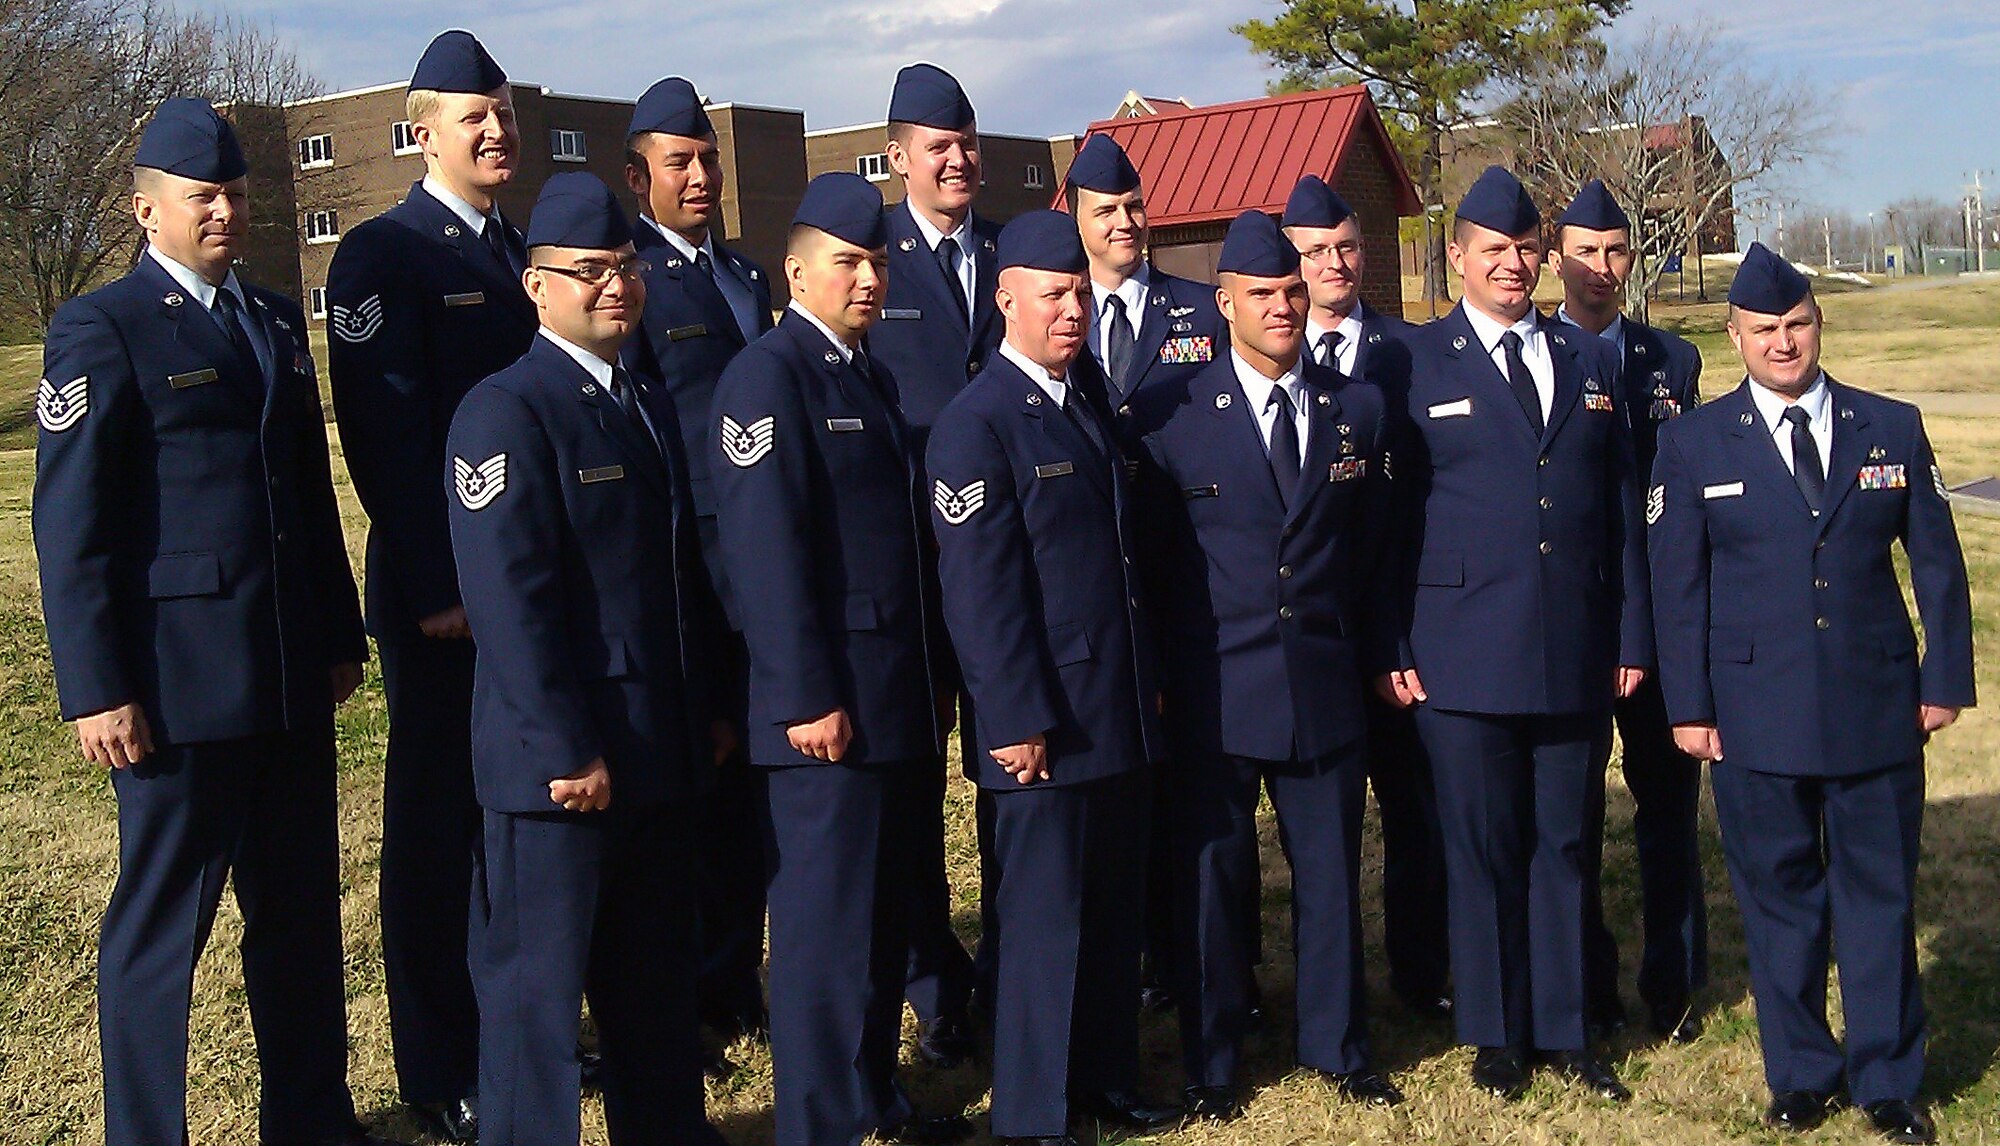 Thirteen members of the Utah Air National Guard graduated from the Noncommissioned Officer Academy at McGhee Tyson Air National Guard Base, Tenn. on Dec. 12. Front row (left to right): Technical Sergeants Ricky Carrillo, Dusty Littleford, John Stroh, Adam Baker, Robert Petersen and Jarod Rich. Back row (left to right): Technical Sergeants Harry Grow, Kevin Gowers, Daniel Dominguez, David Bauer, Corey McCumber, Will Paetsch and Jeffrey Uberti. To graduate these Guardmembers attended a 13-week class at the Utah ANG base, then completed two additional weeks of training at McGhee Tyson ANG. (Air Force photo courtesy of Senior Master Sgt. Jay Rose/Released)